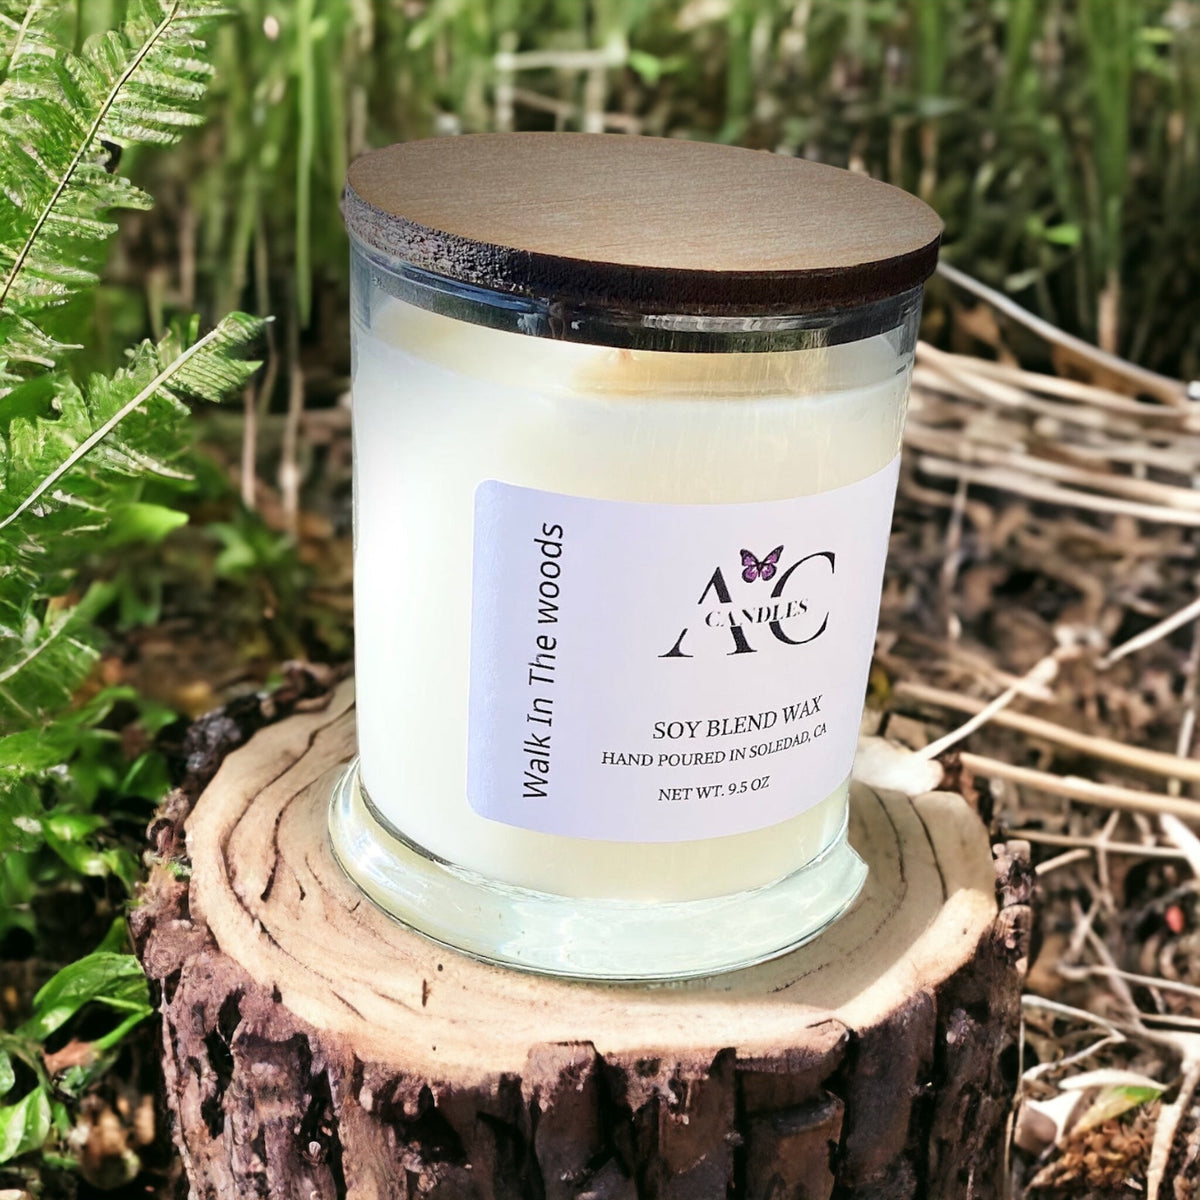 Walk In The Woods Candle